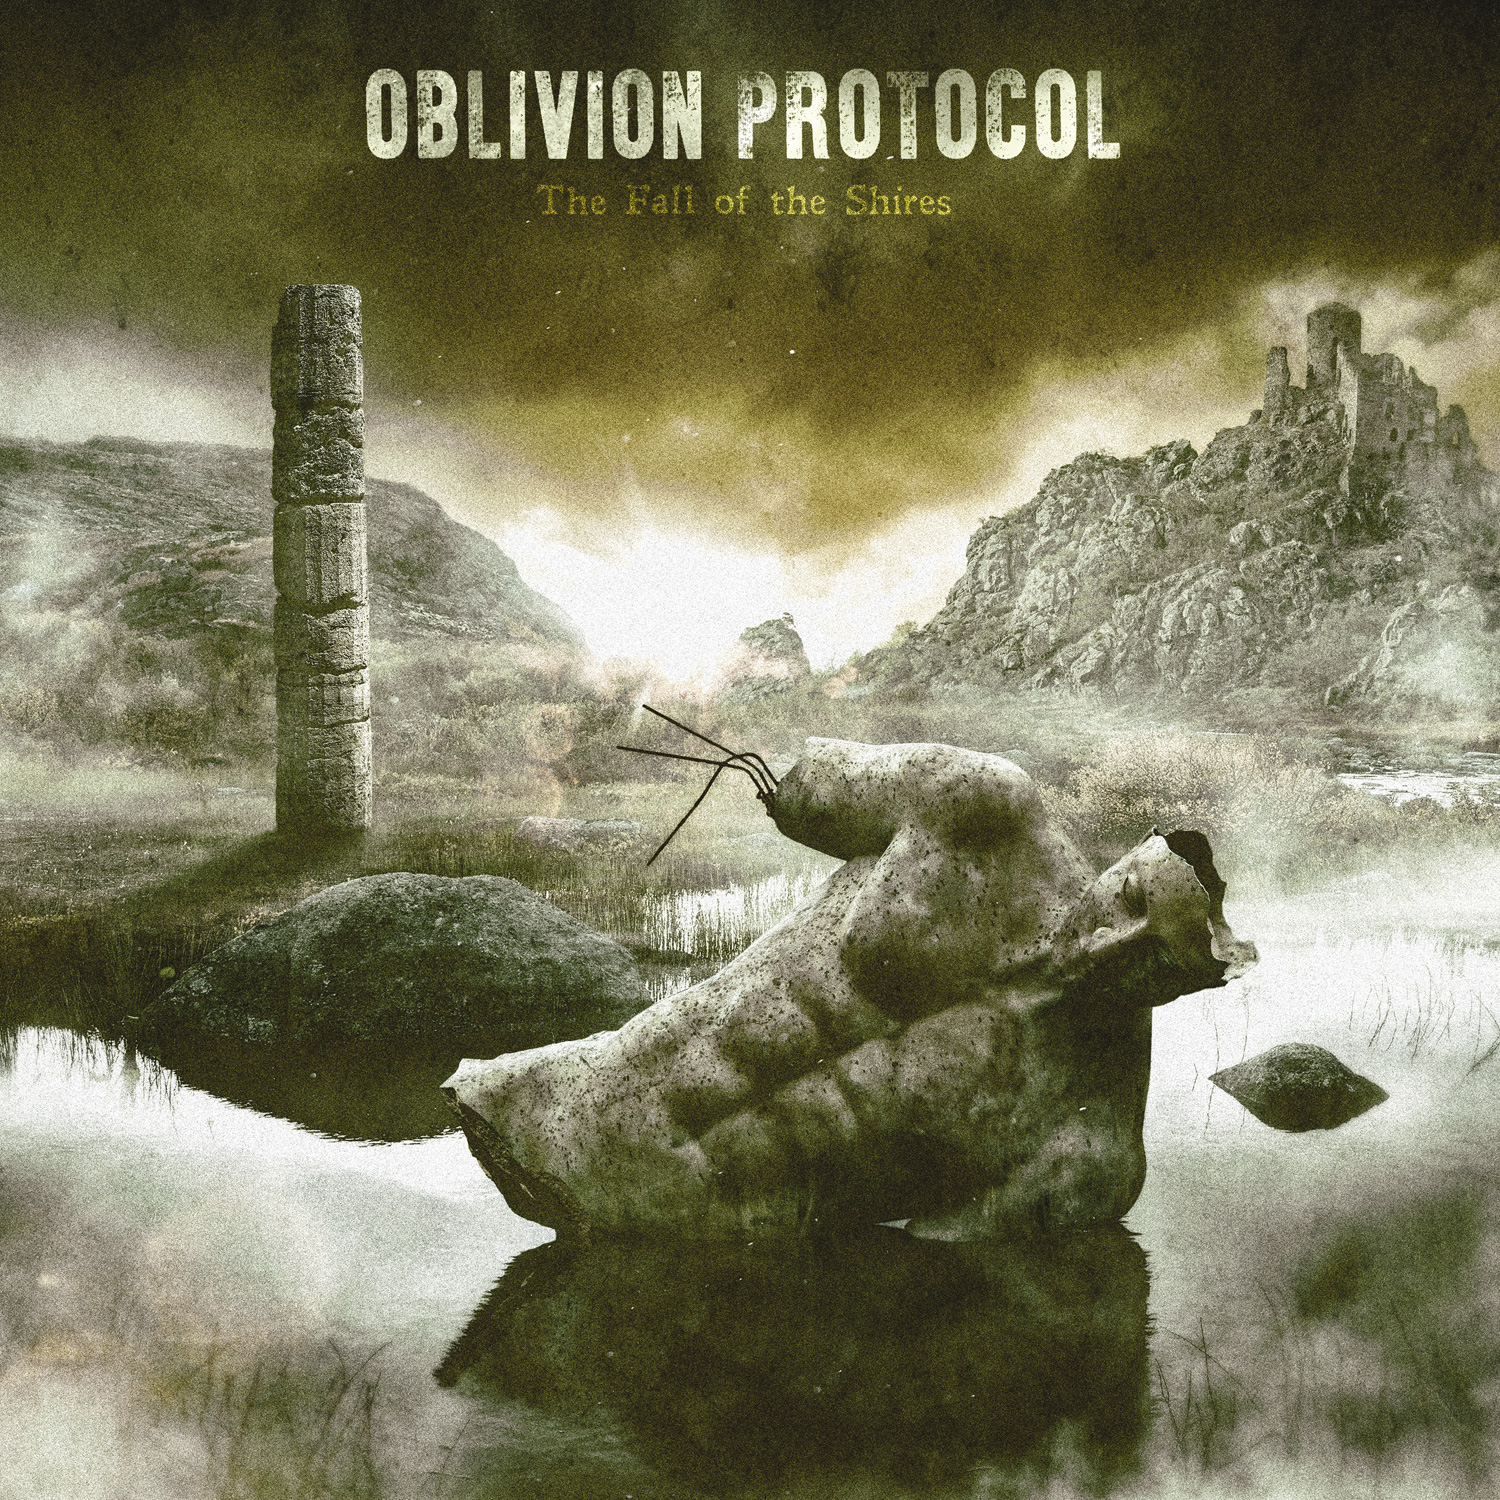 Oblivion Protocol: The Fall of the Shires